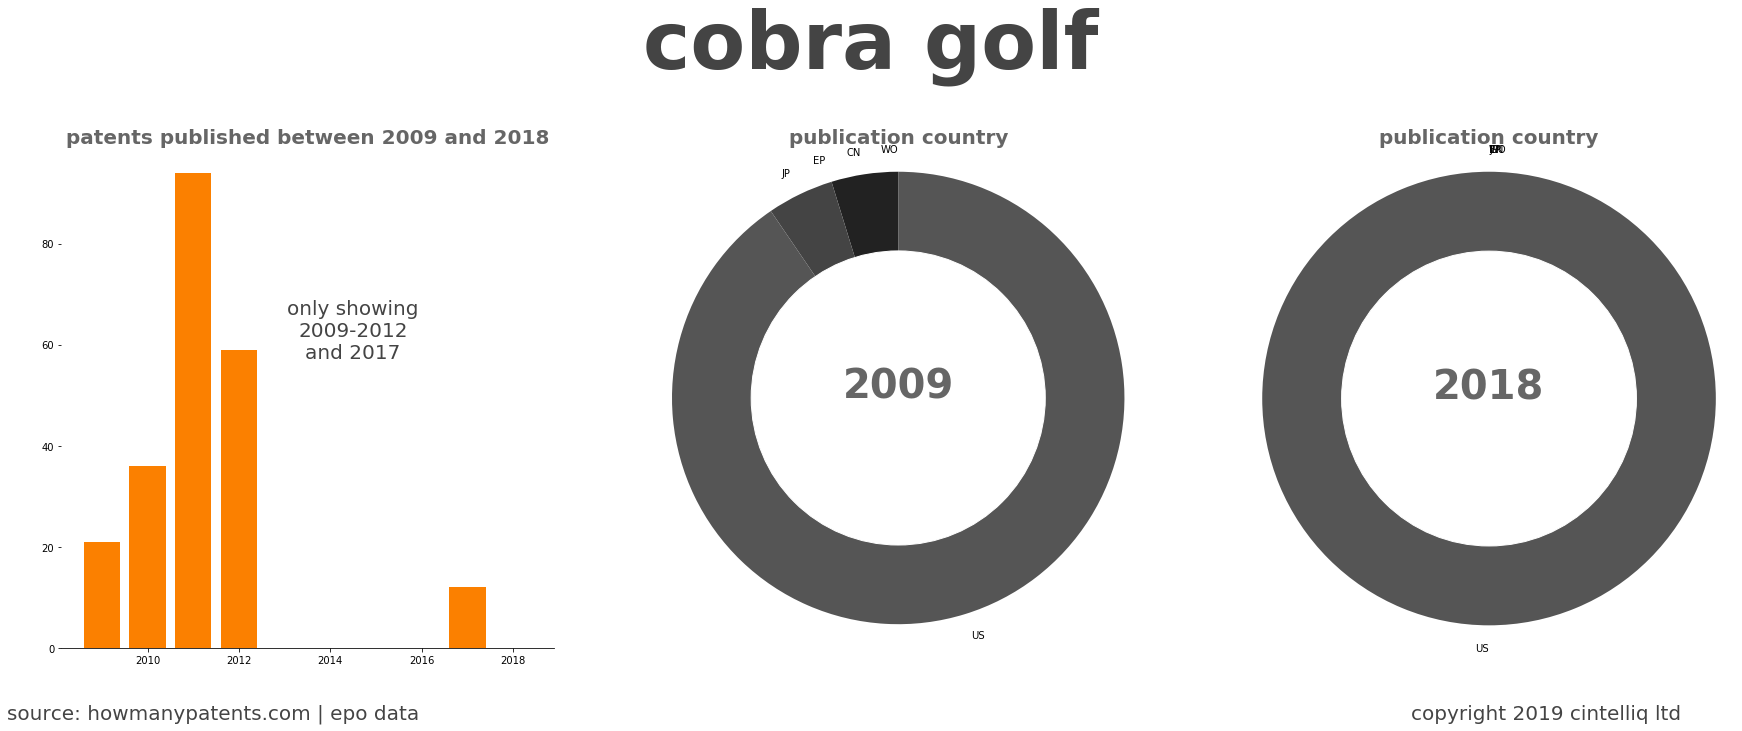 summary of patents for Cobra Golf